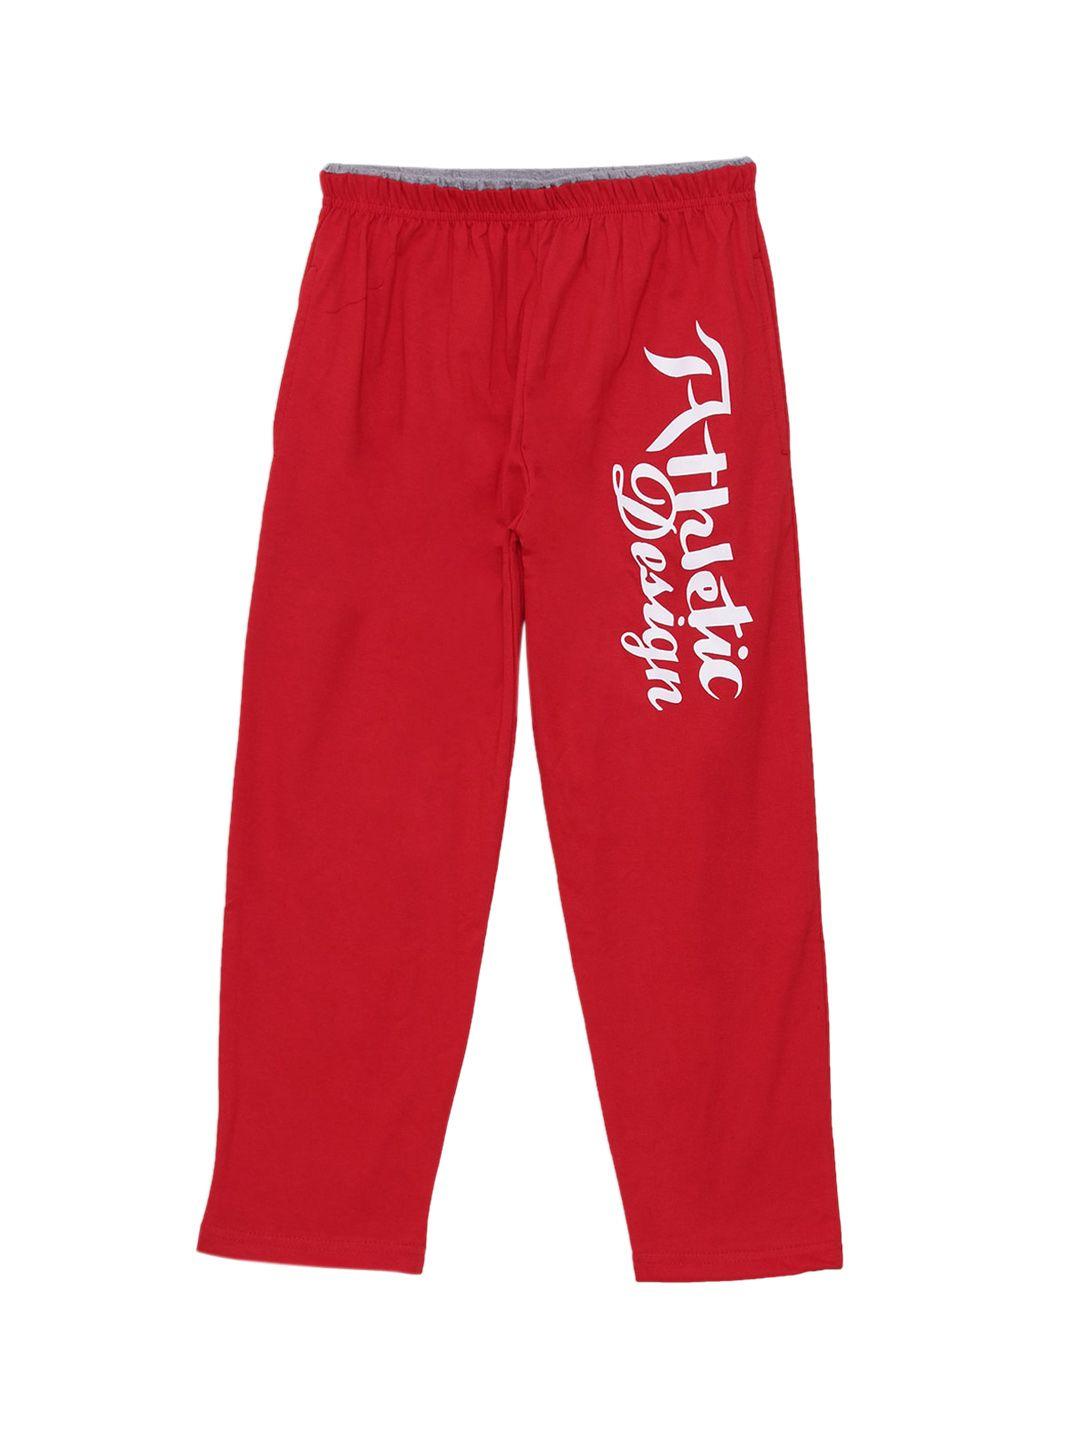 fashionable boys red & white printed cotton track pants